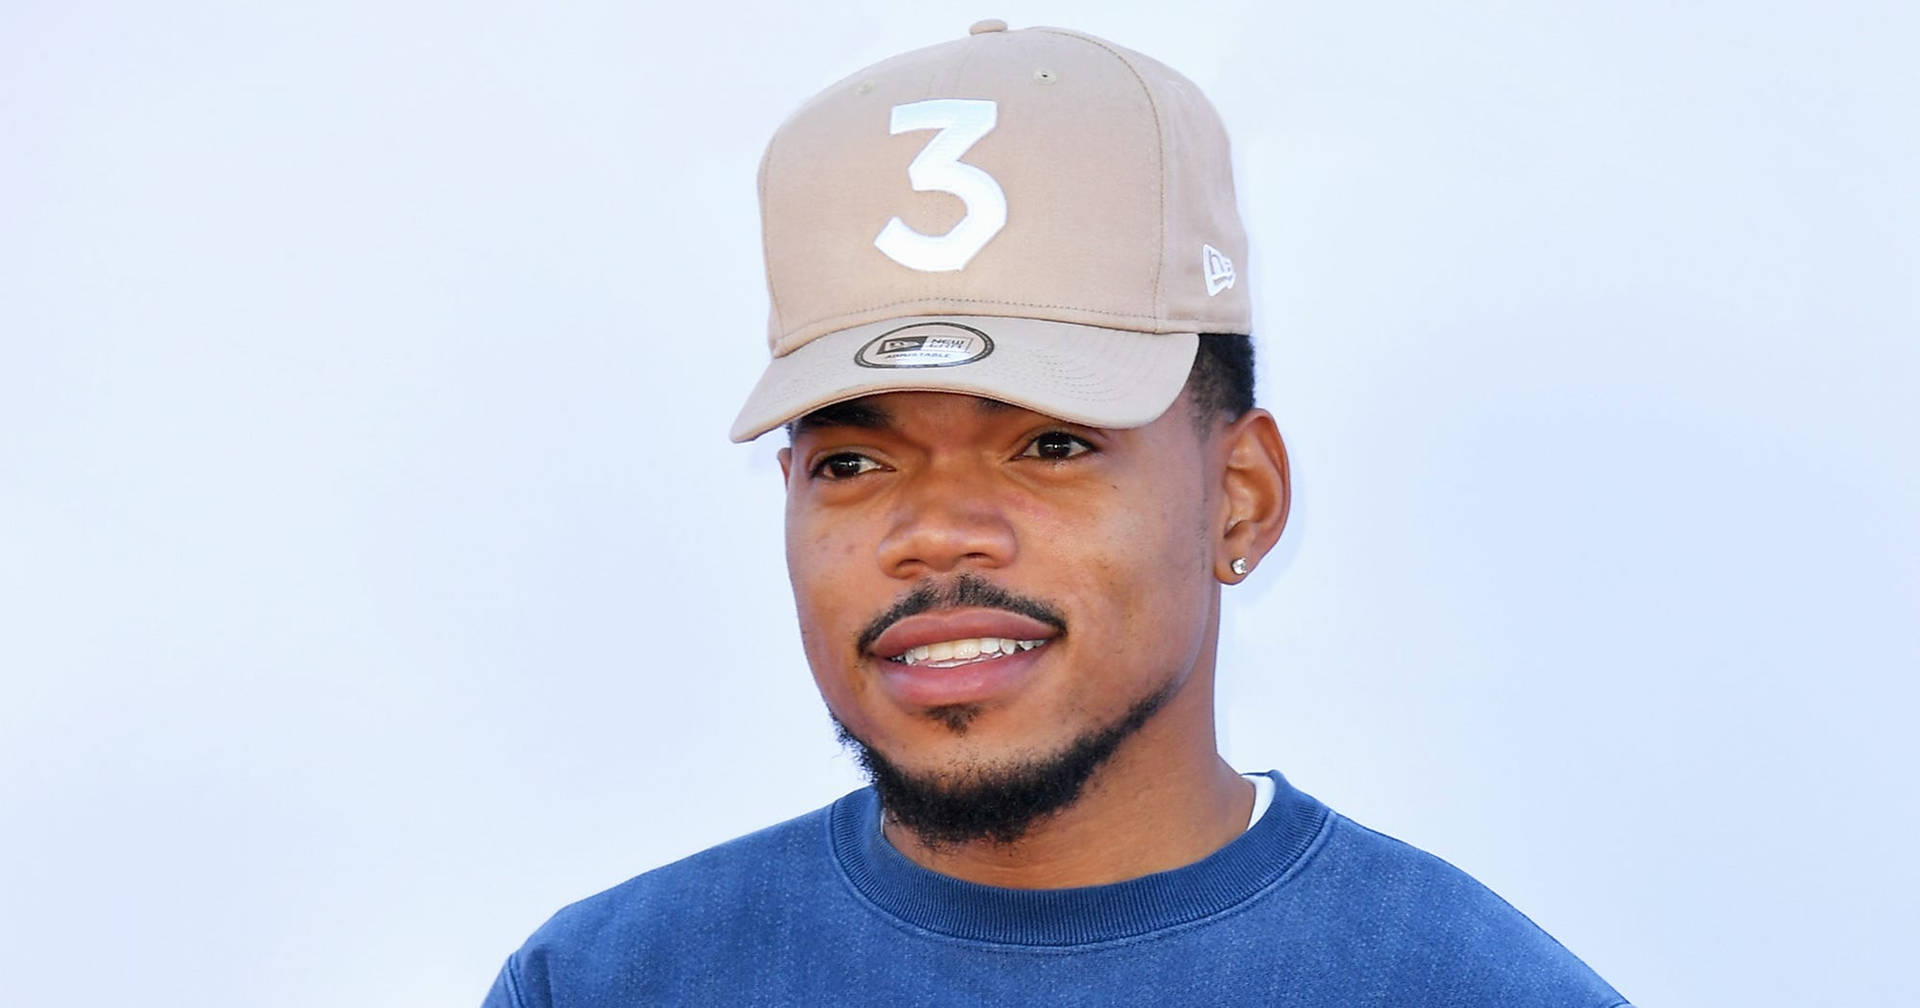 Chance The Rapper 3 Cap Background